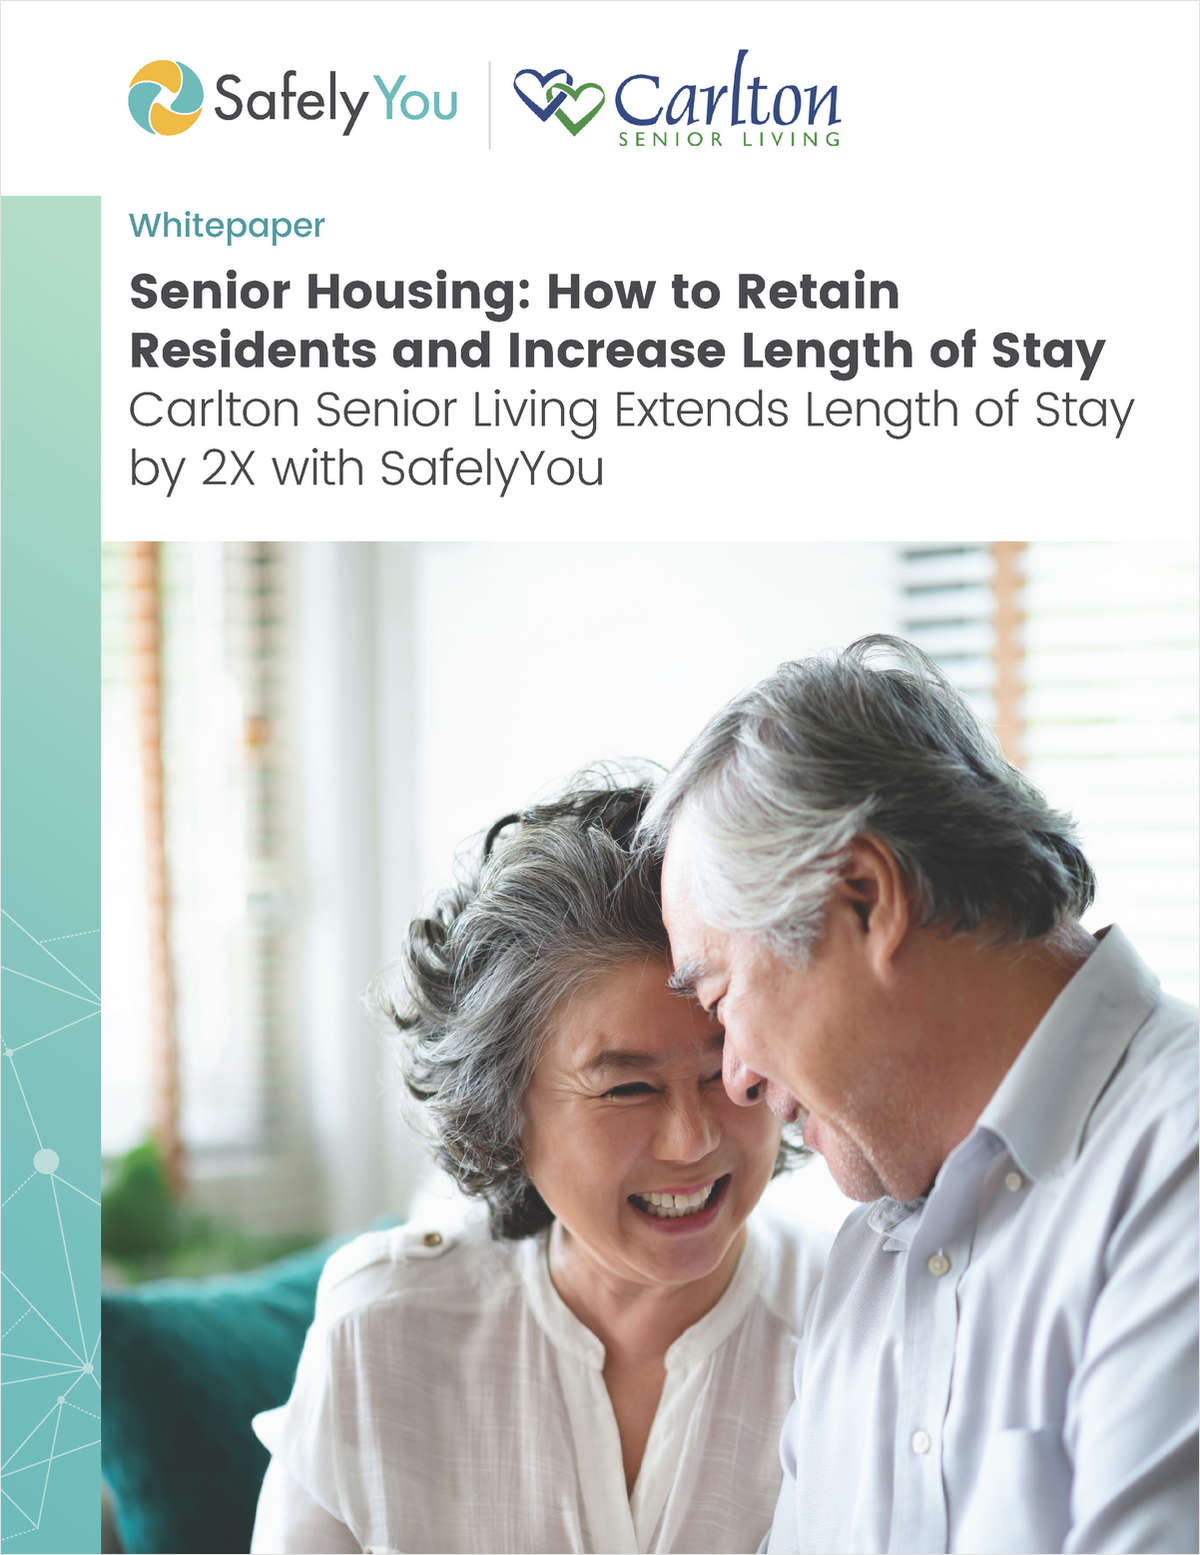 Carlton Senior Living: Retain Residents and Increase Length of Stay